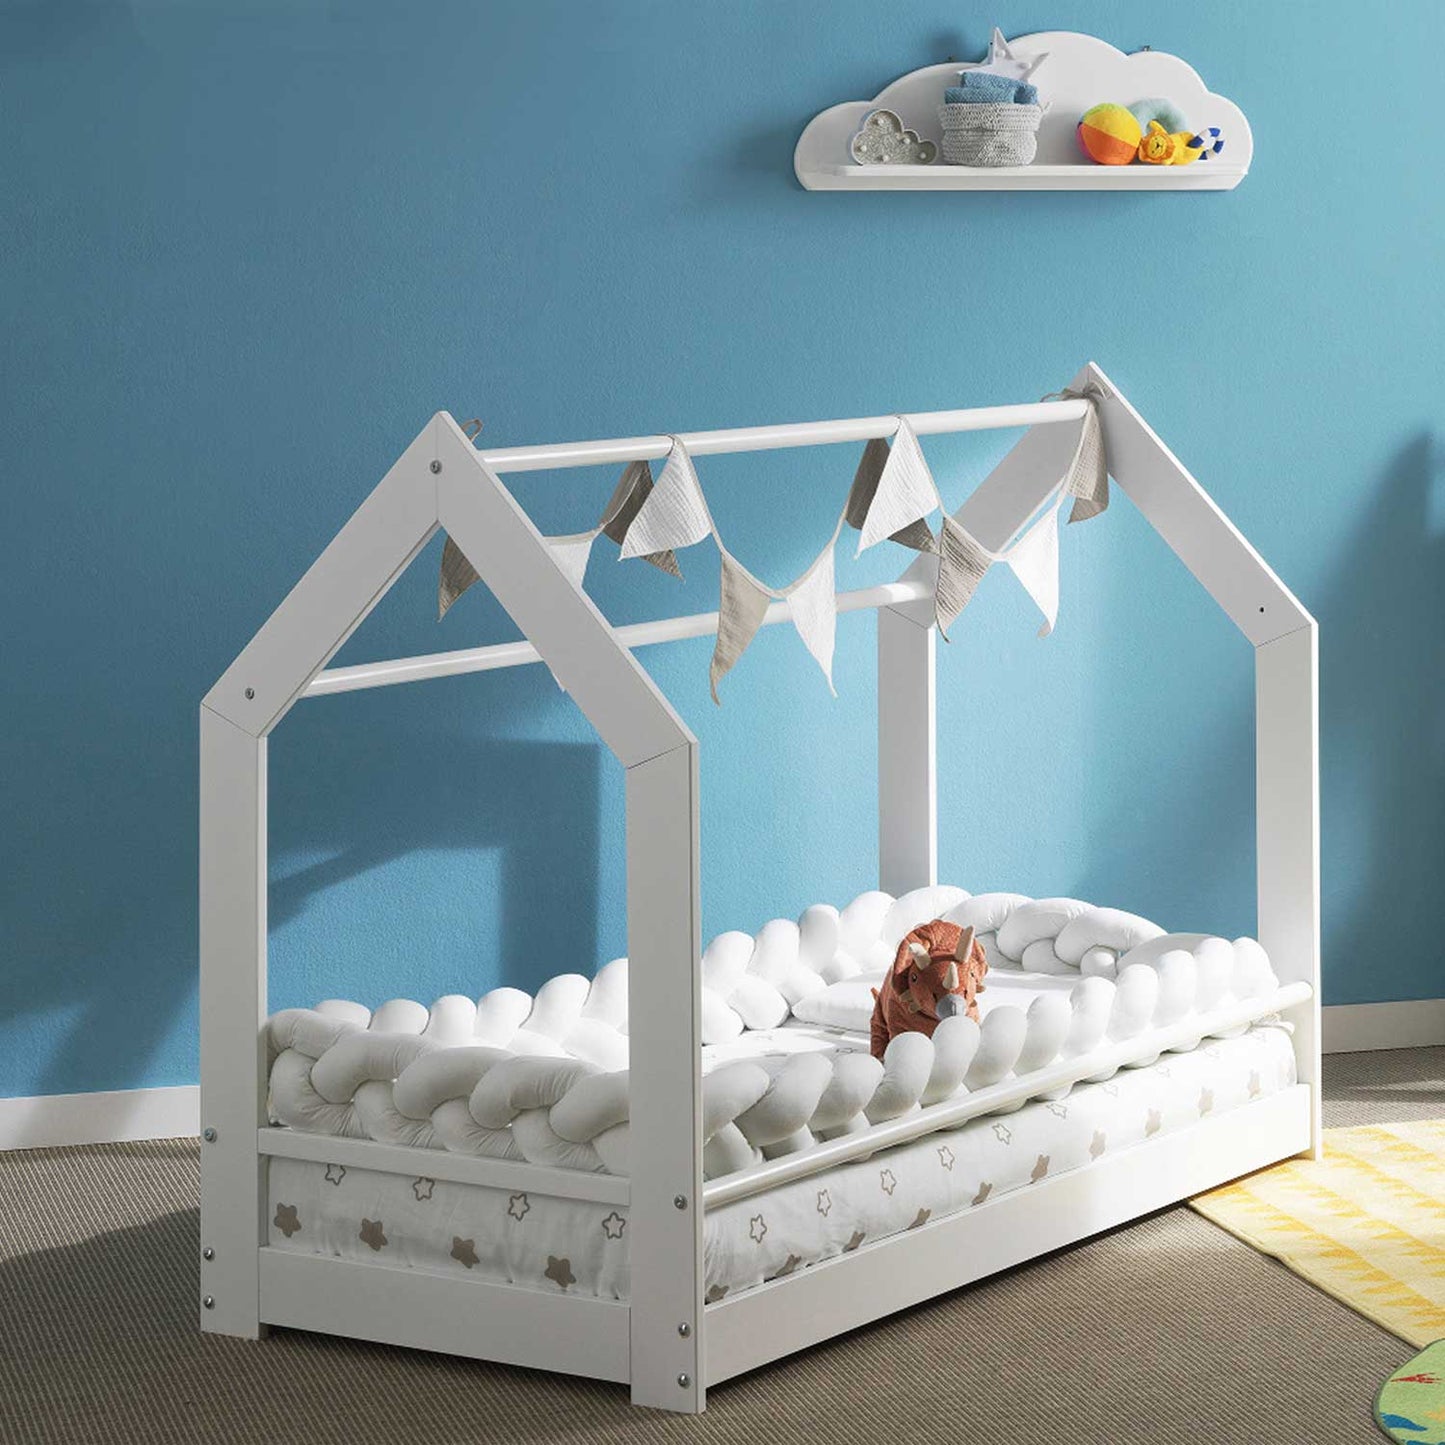 Pali - Freedom wooden cot with mattress